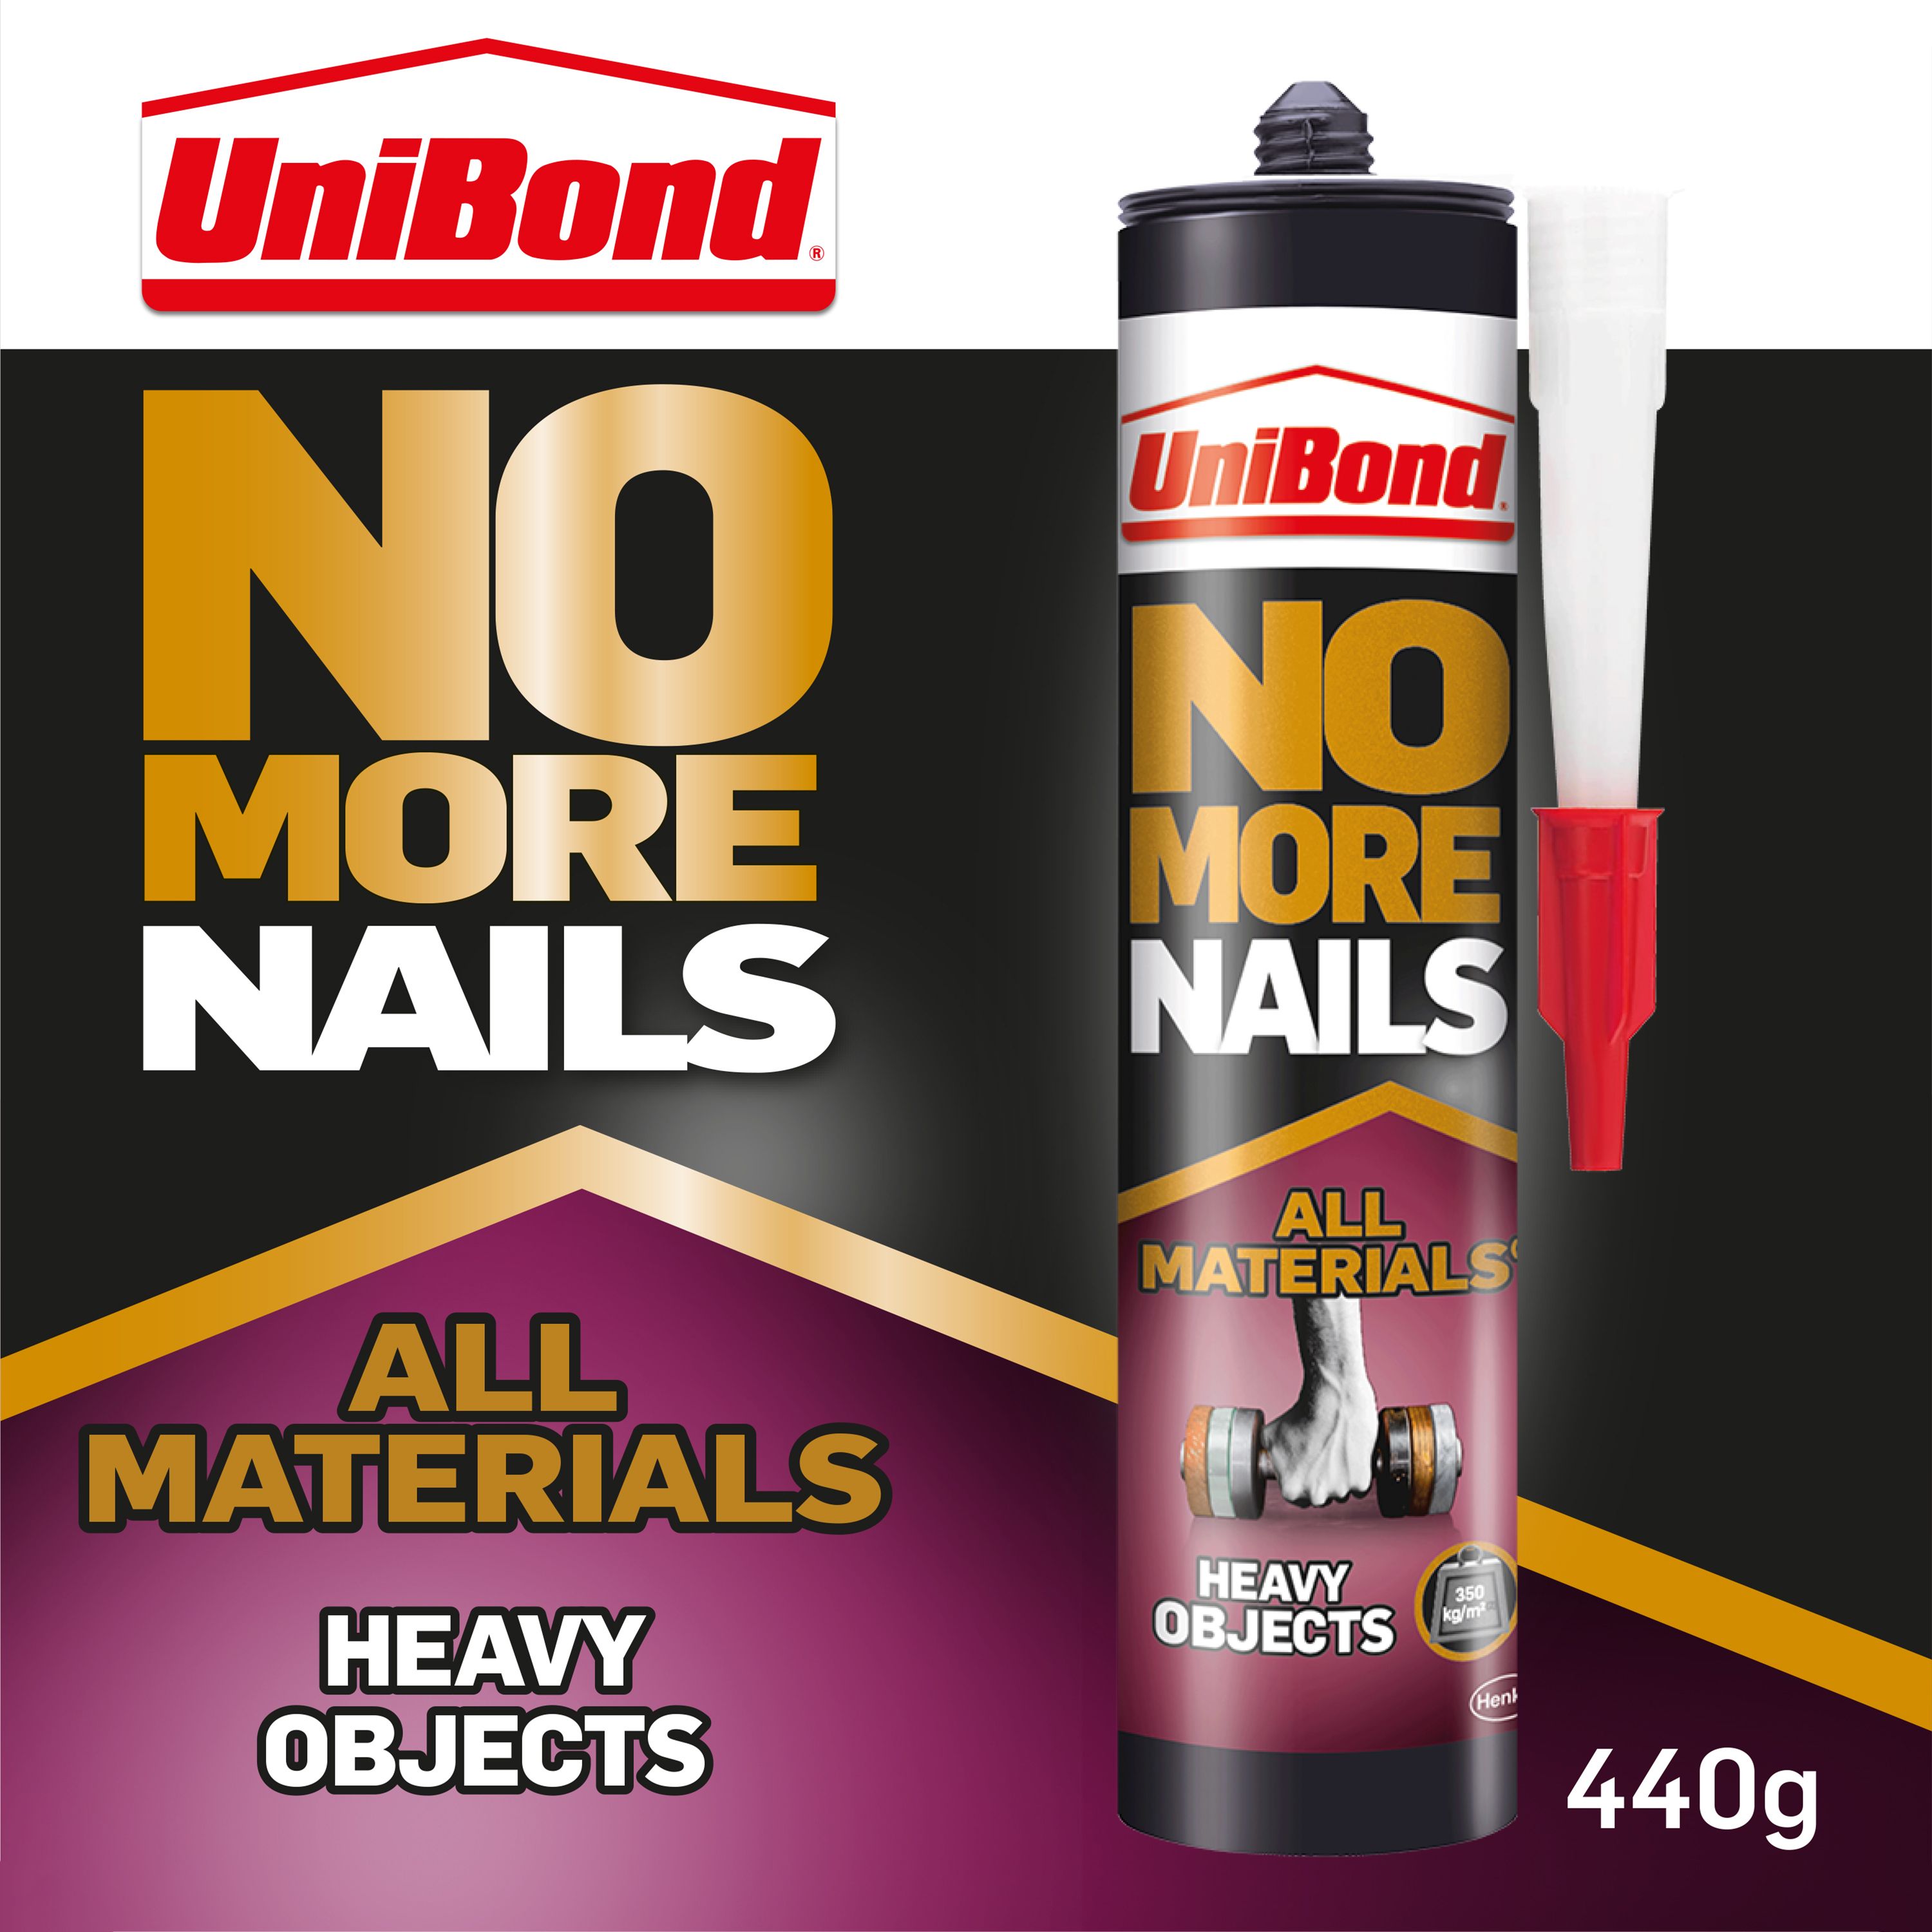 UniBond No More Nails Heavy Objects Solvent-free White All materials Grab adhesive 440g